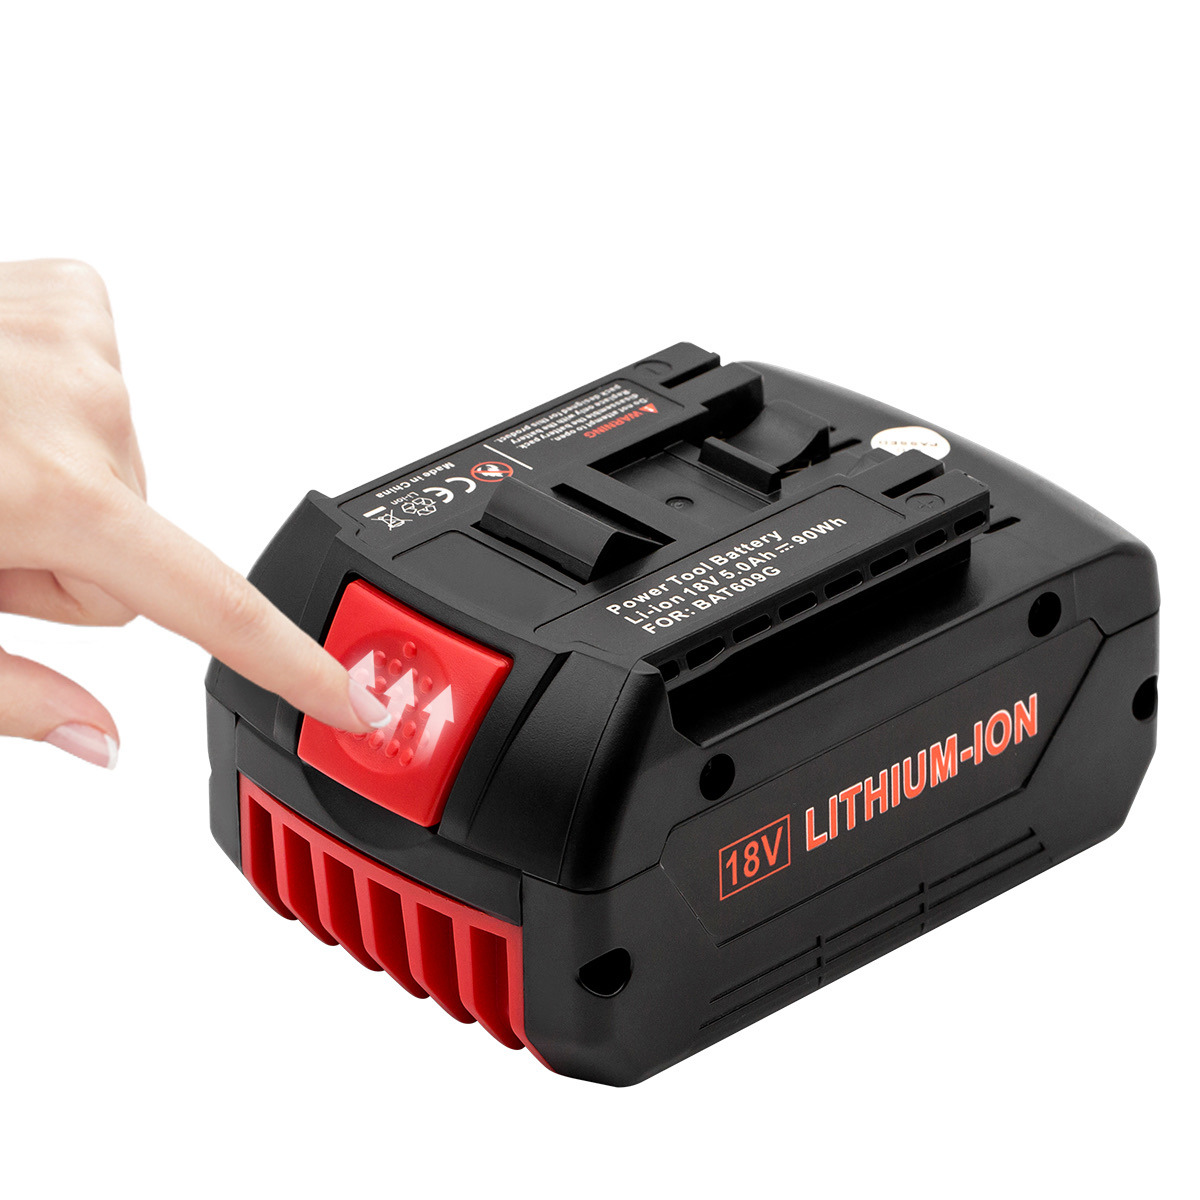 What’s The Best Batteries For Power Tools